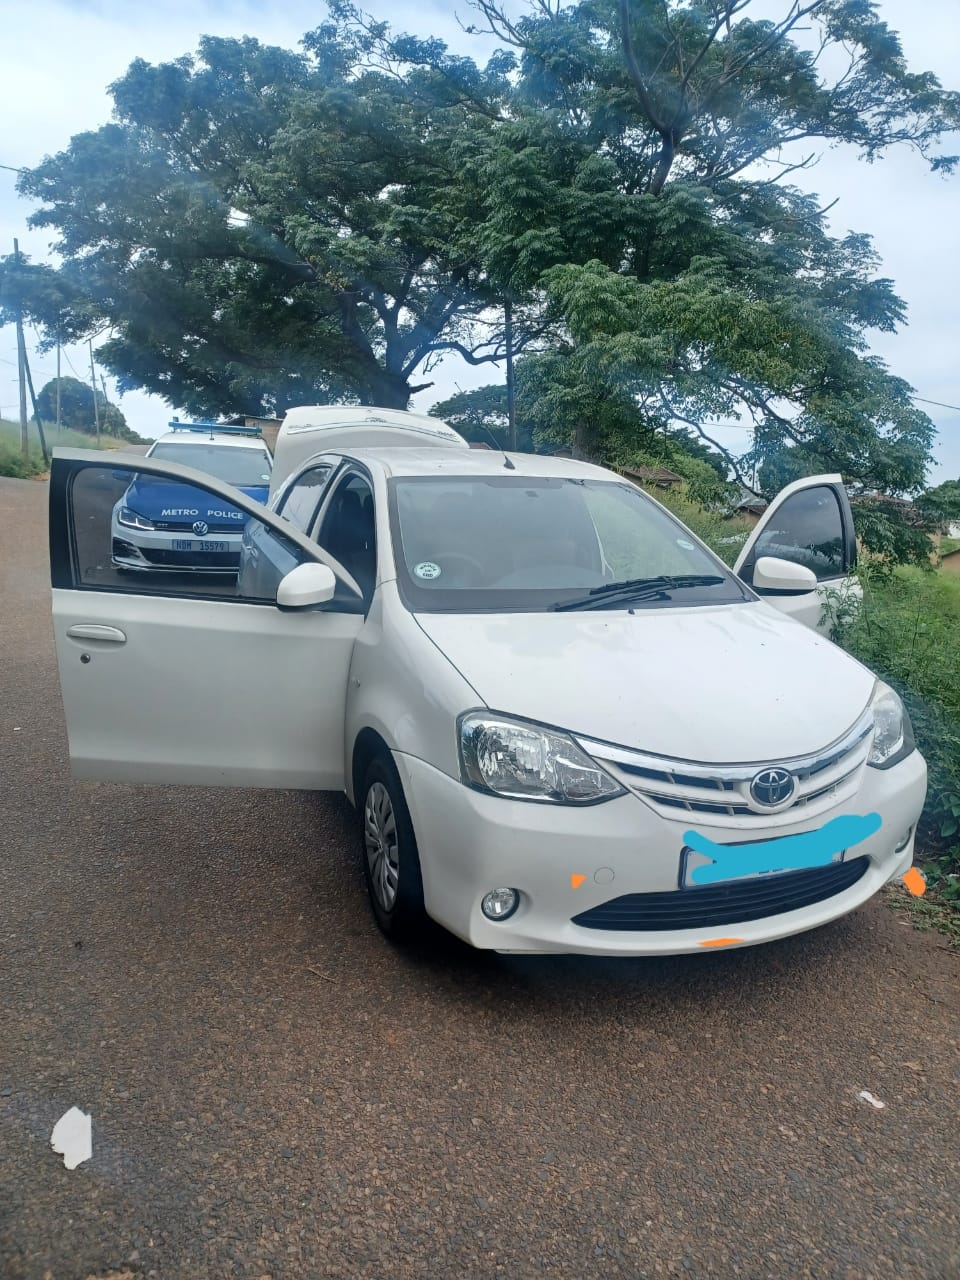 Stolen vehicle recovered in Umlazi by Durban Metro Police Service